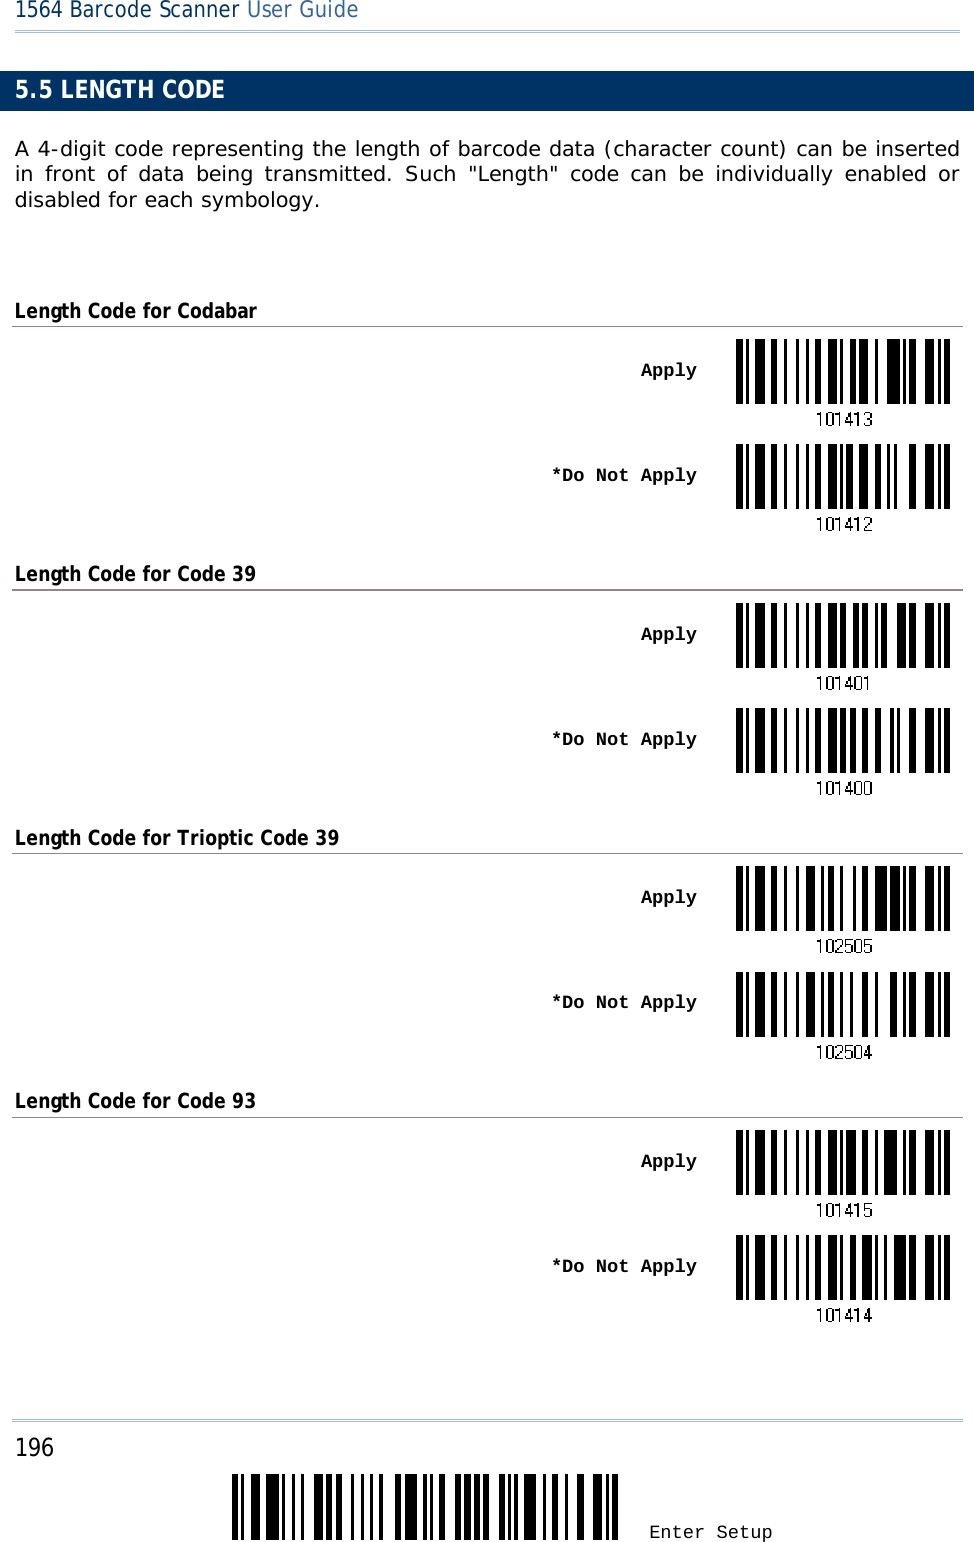 196 Enter Setup 1564 Barcode Scanner User Guide  5.5 LENGTH CODE A 4-digit code representing the length of barcode data (character count) can be inserted in front of data being transmitted. Such &quot;Length&quot; code can be individually enabled or disabled for each symbology.  Length Code for Codabar  Apply *Do Not ApplyLength Code for Code 39  Apply *Do Not ApplyLength Code for Trioptic Code 39  Apply *Do Not ApplyLength Code for Code 93  Apply *Do Not Apply 